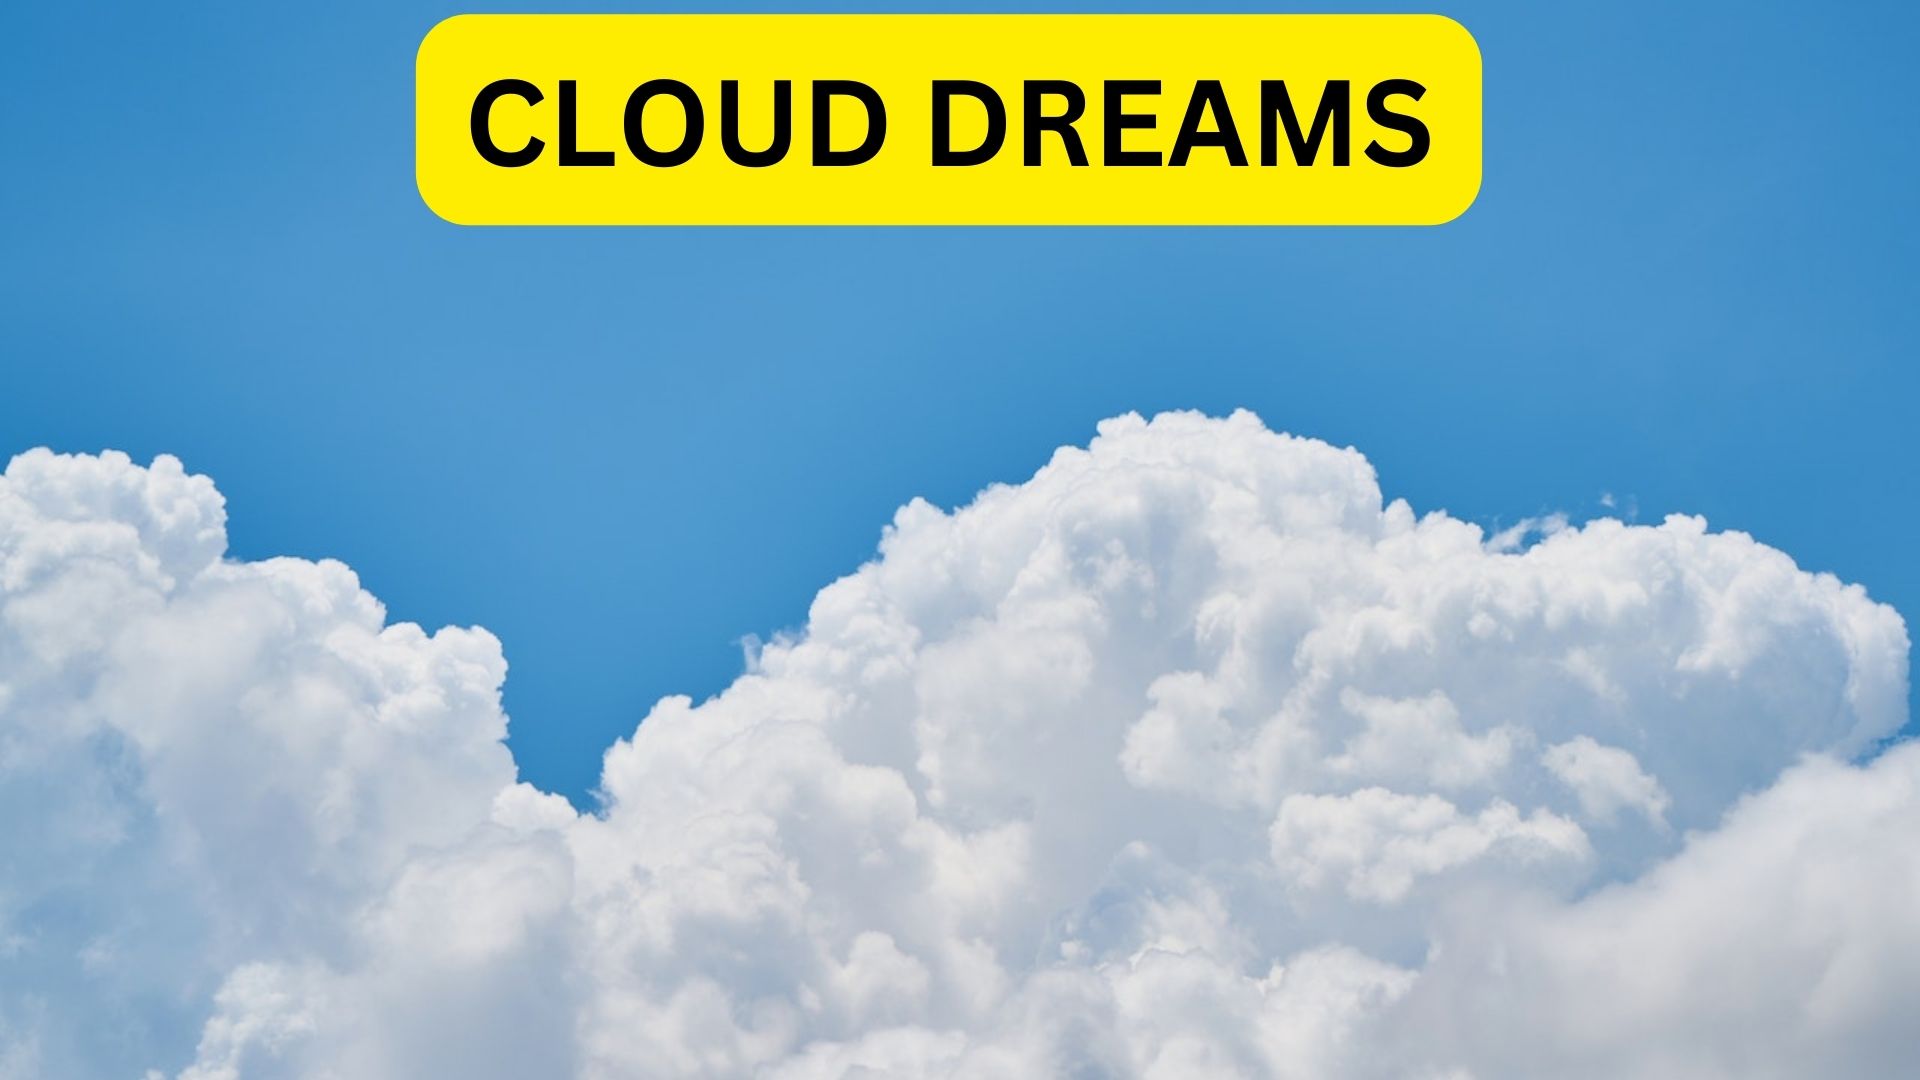 Cloud Dreams - A Symbol Of The Past And Satisfaction